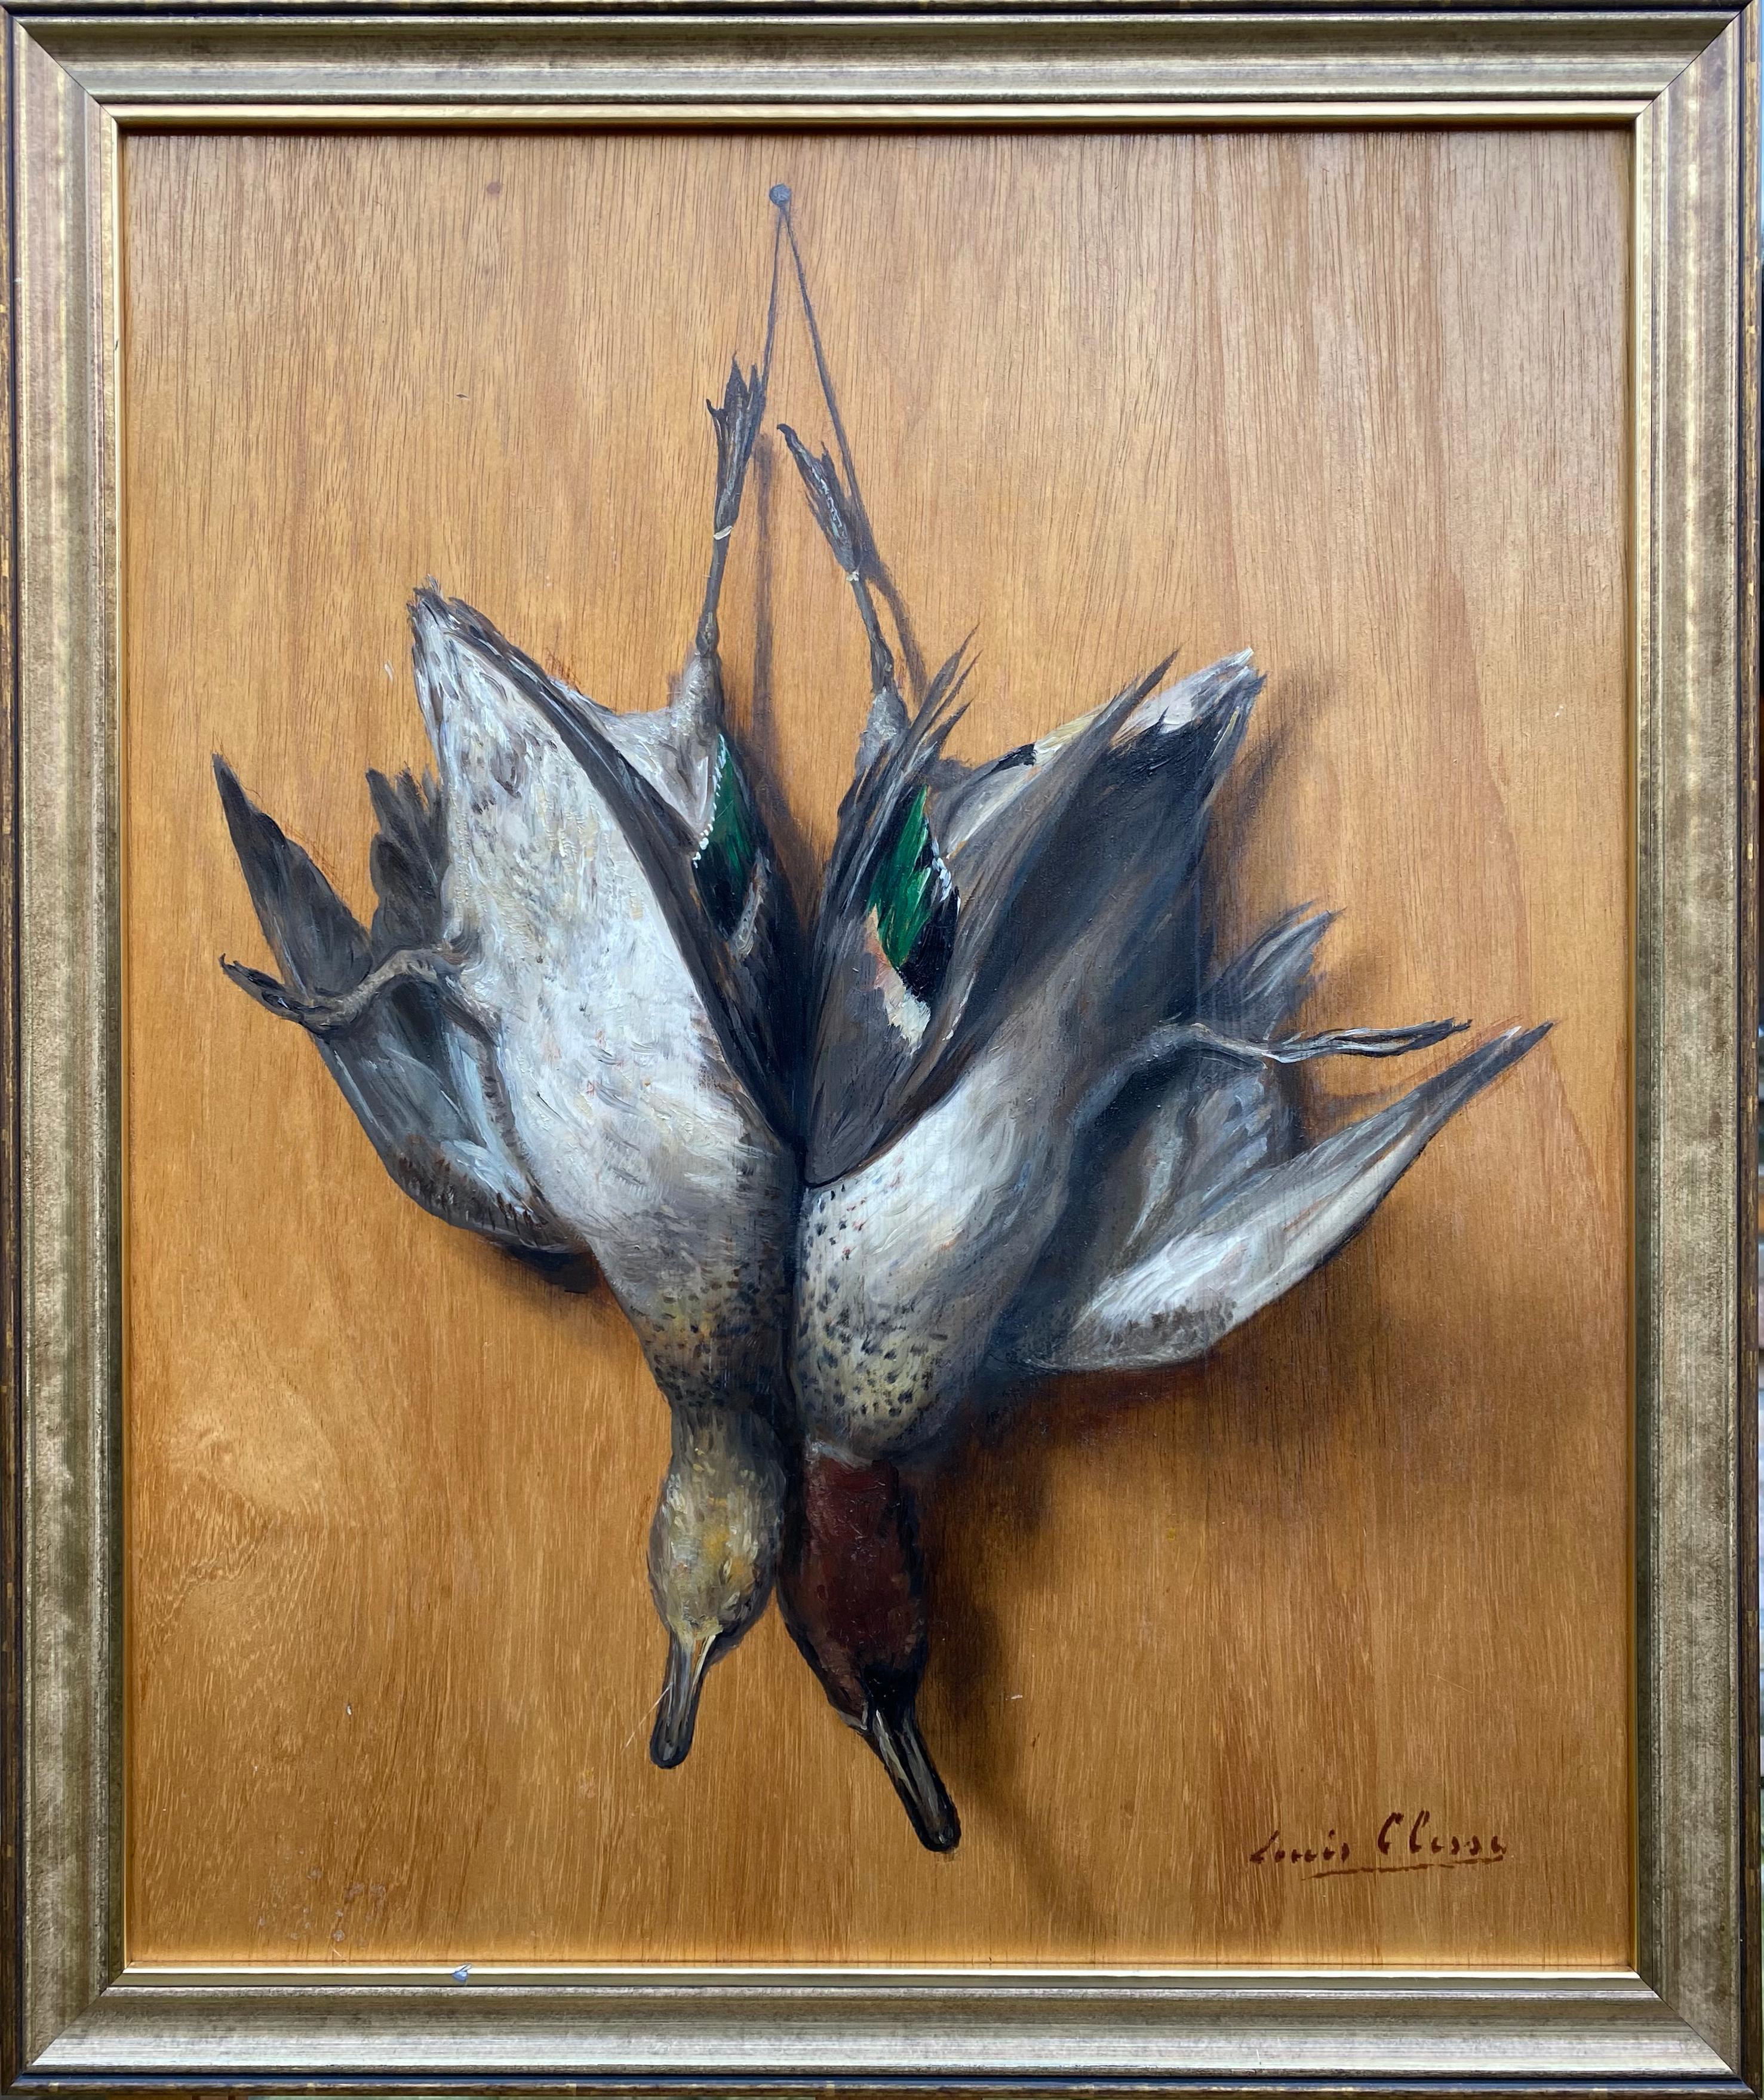 Clesse Louis Still-Life Painting - Trompe L’Oeil of Two Ducks, Louis Clesse, Brussels 1889 – 1961, Belgian Painter